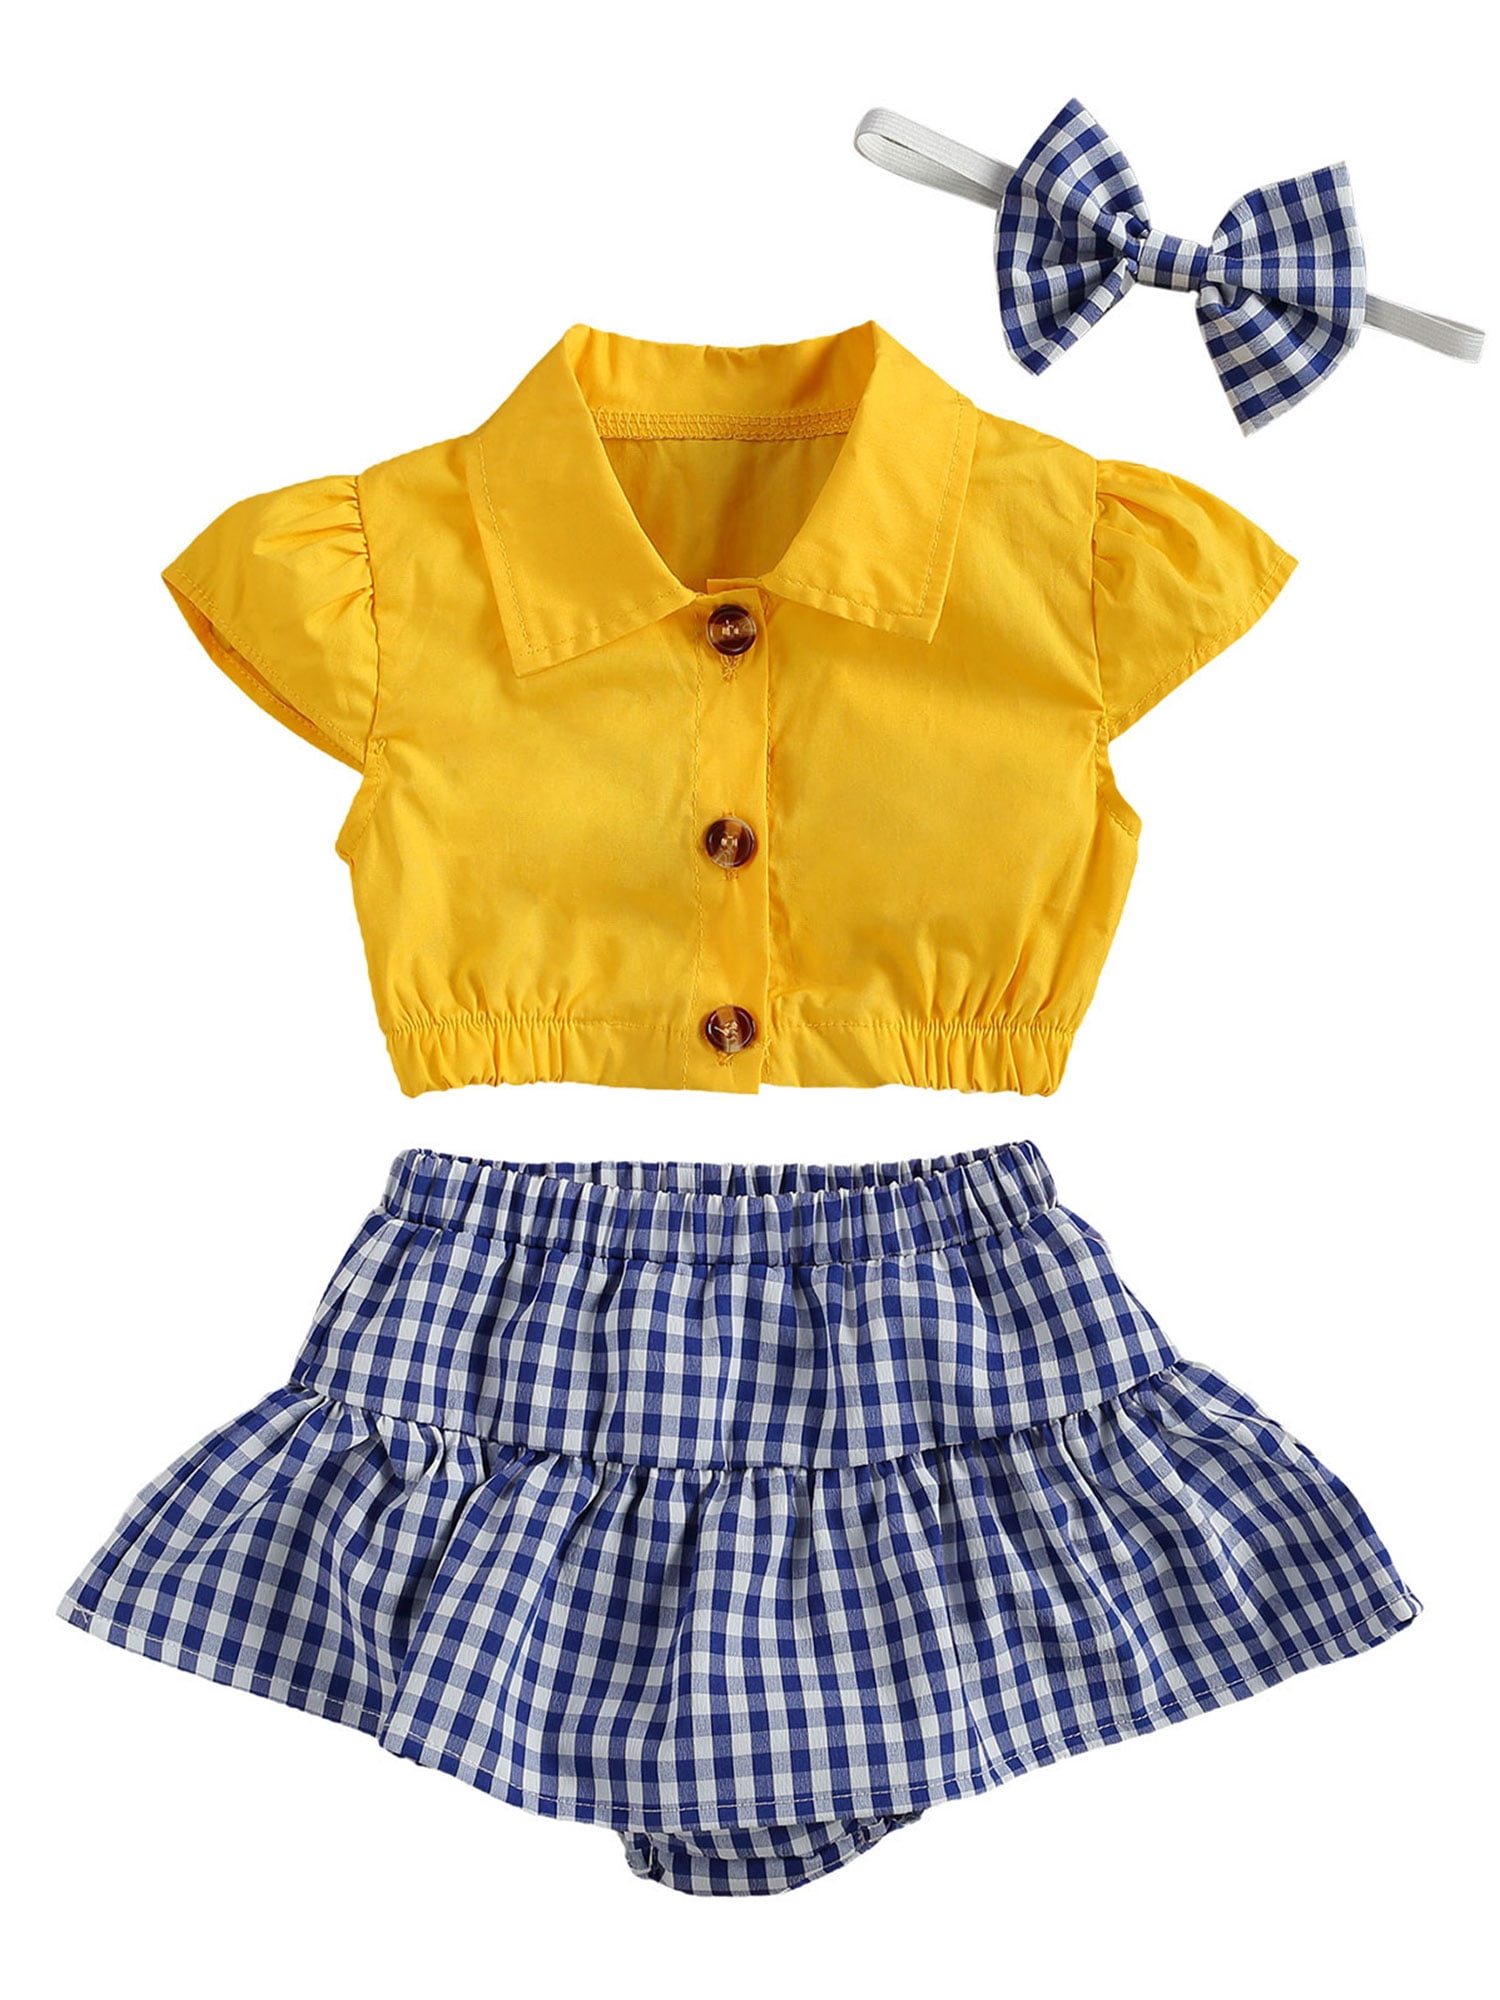 Summer Toddler Baby Girl Ruffle Tops Dress Shorts Plaids Outfits Set Clothes